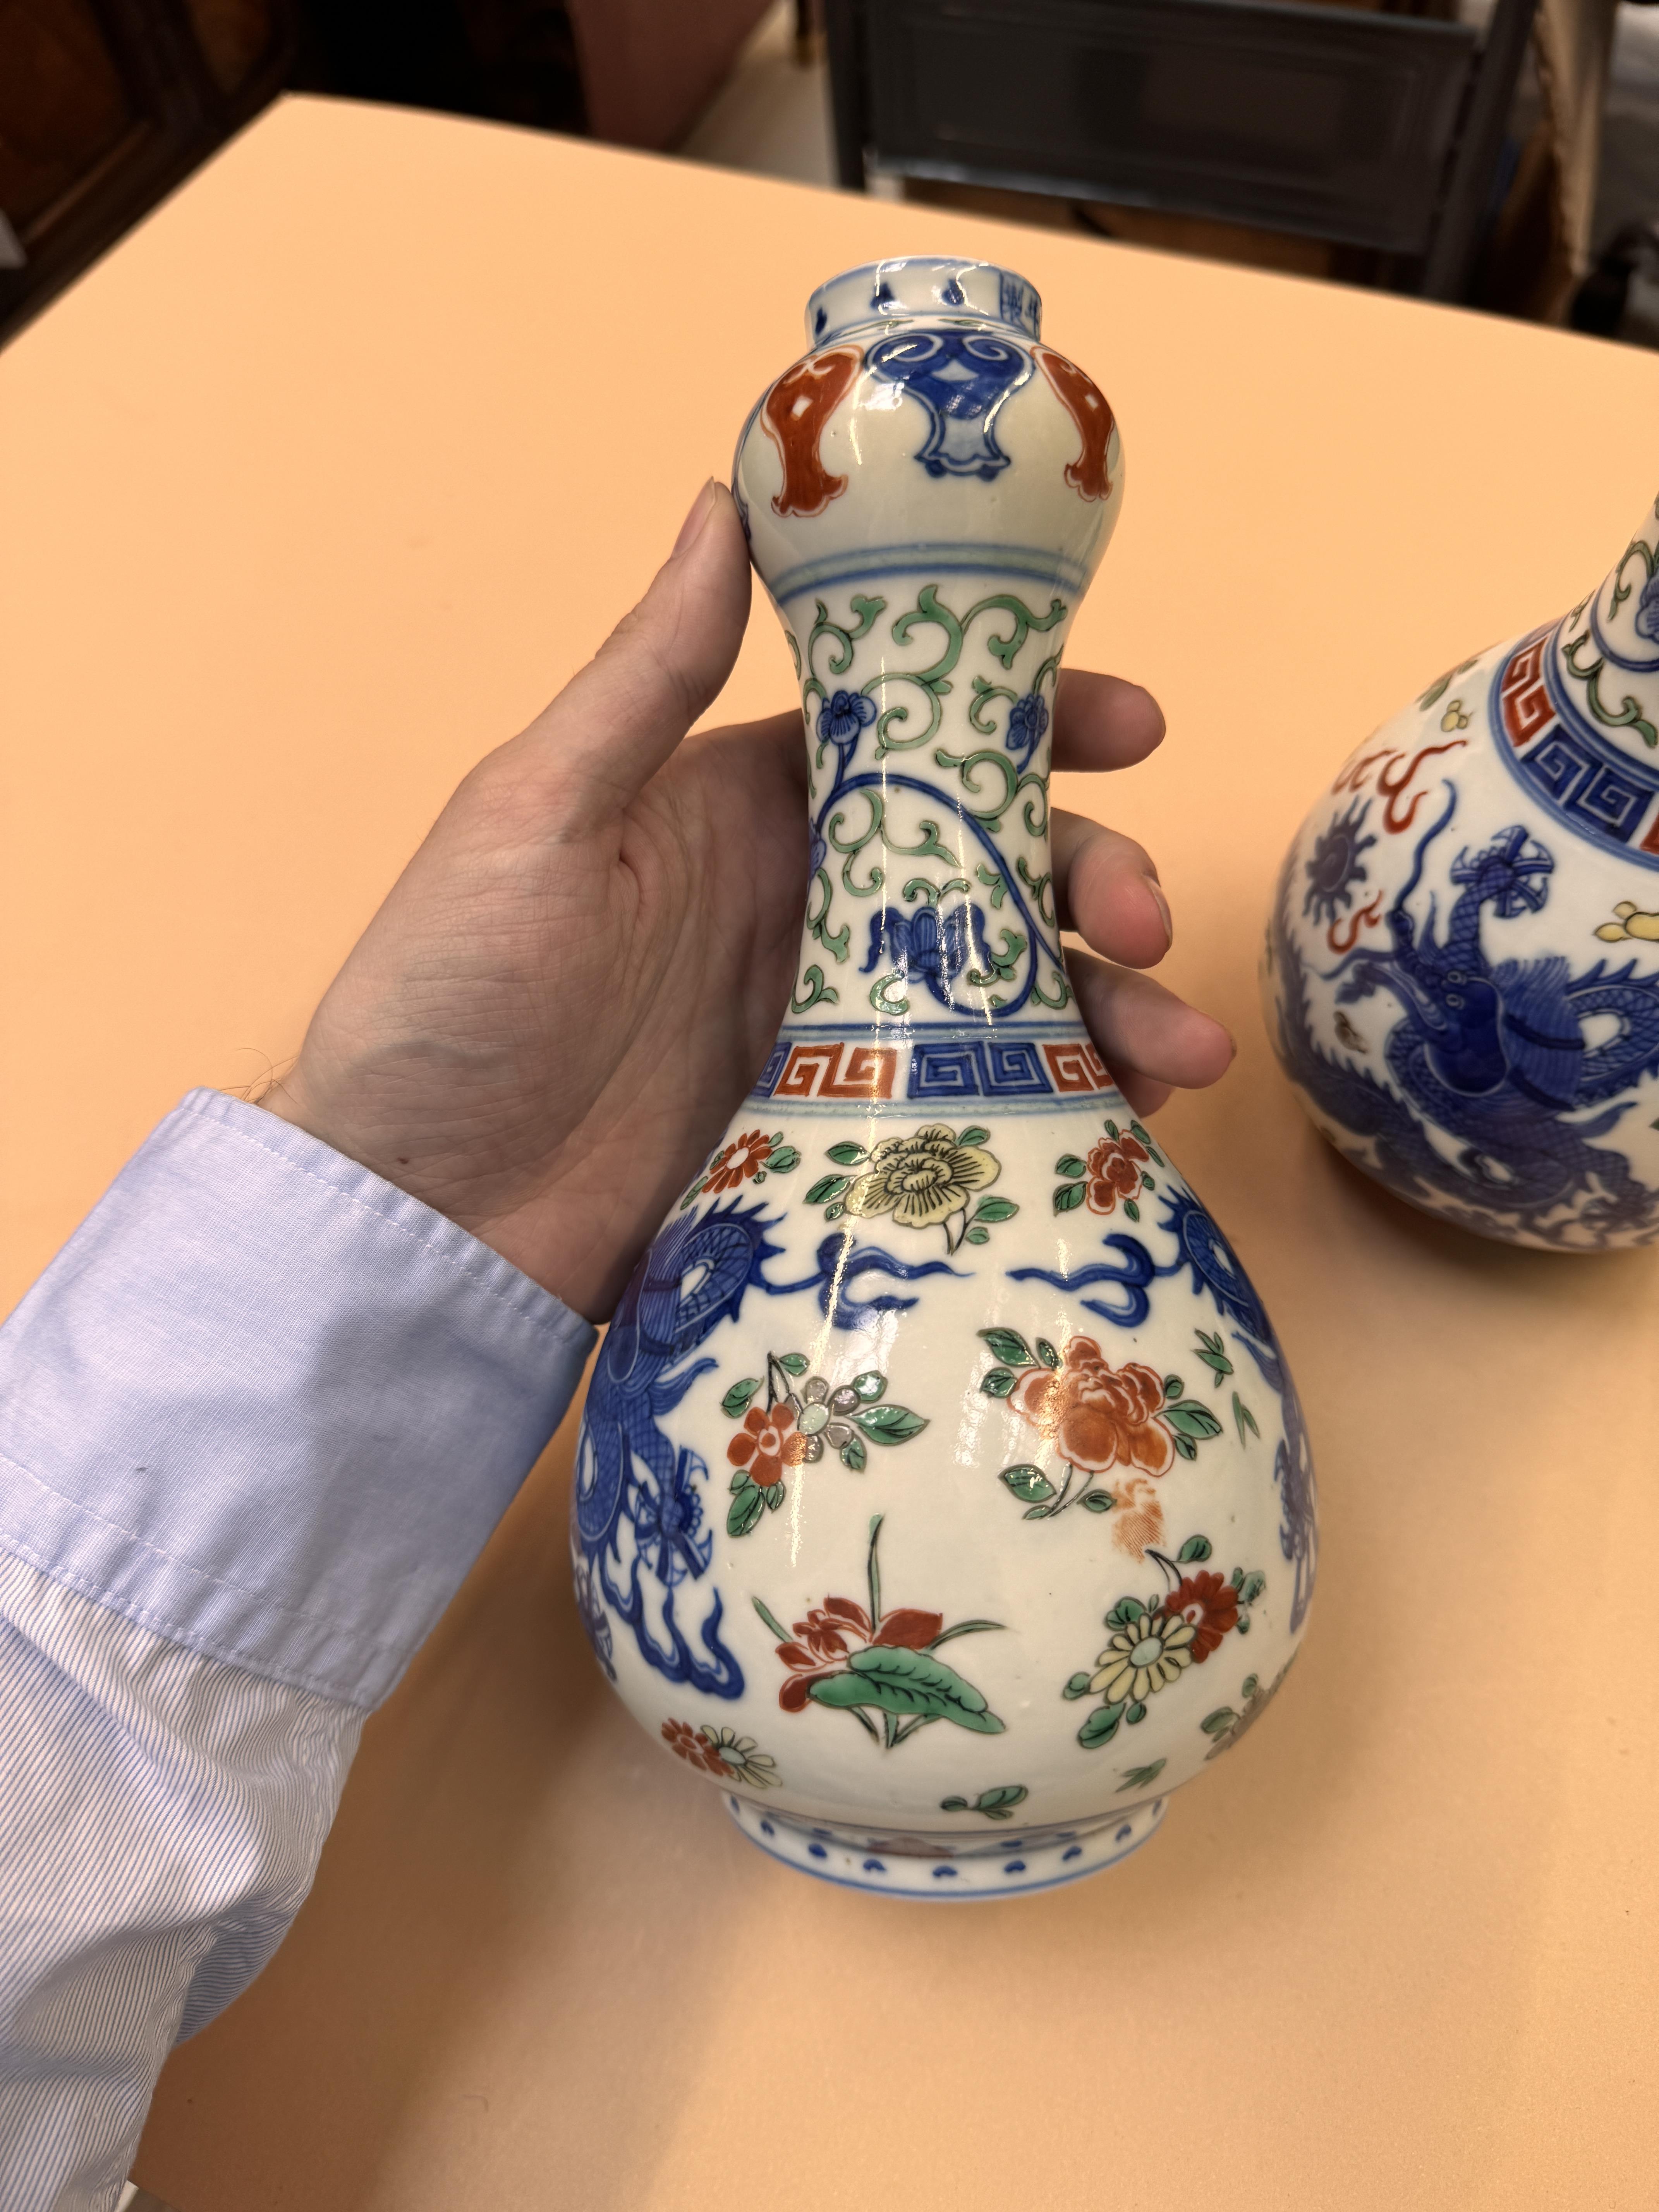 A PAIR OF CHINESE WUCAI 'DRAGON' VASES 民國時期 五彩龍趕珠紋瓶一對 《大明嘉靖年製》款 - Image 2 of 19